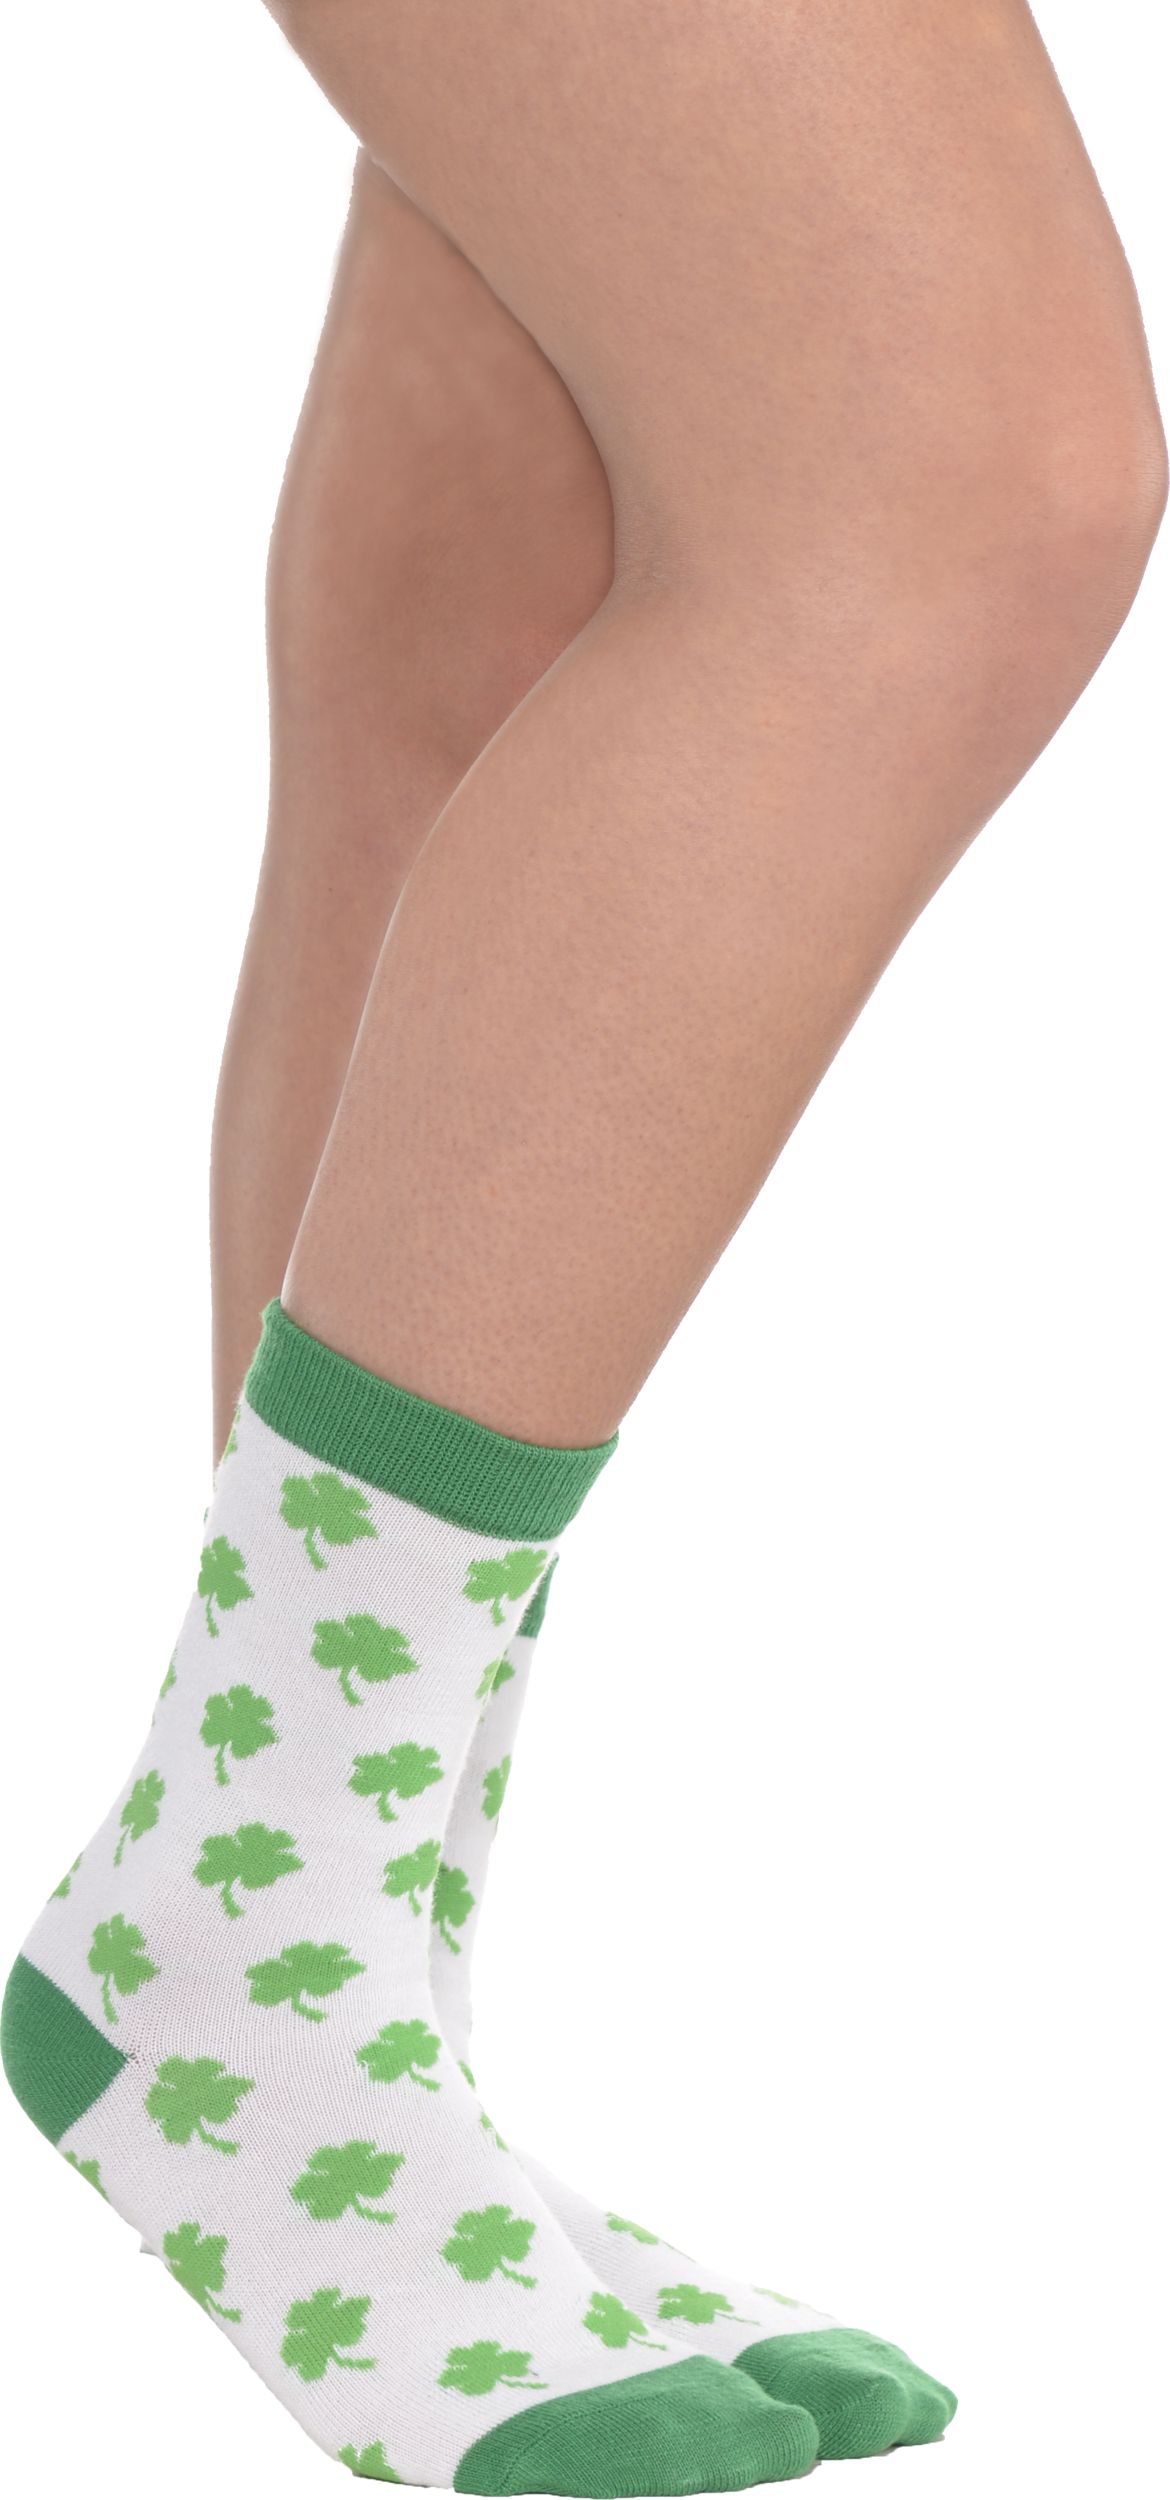  Jeere 6 Pairs St. Patrick's Day Socks Cotton Cosplay